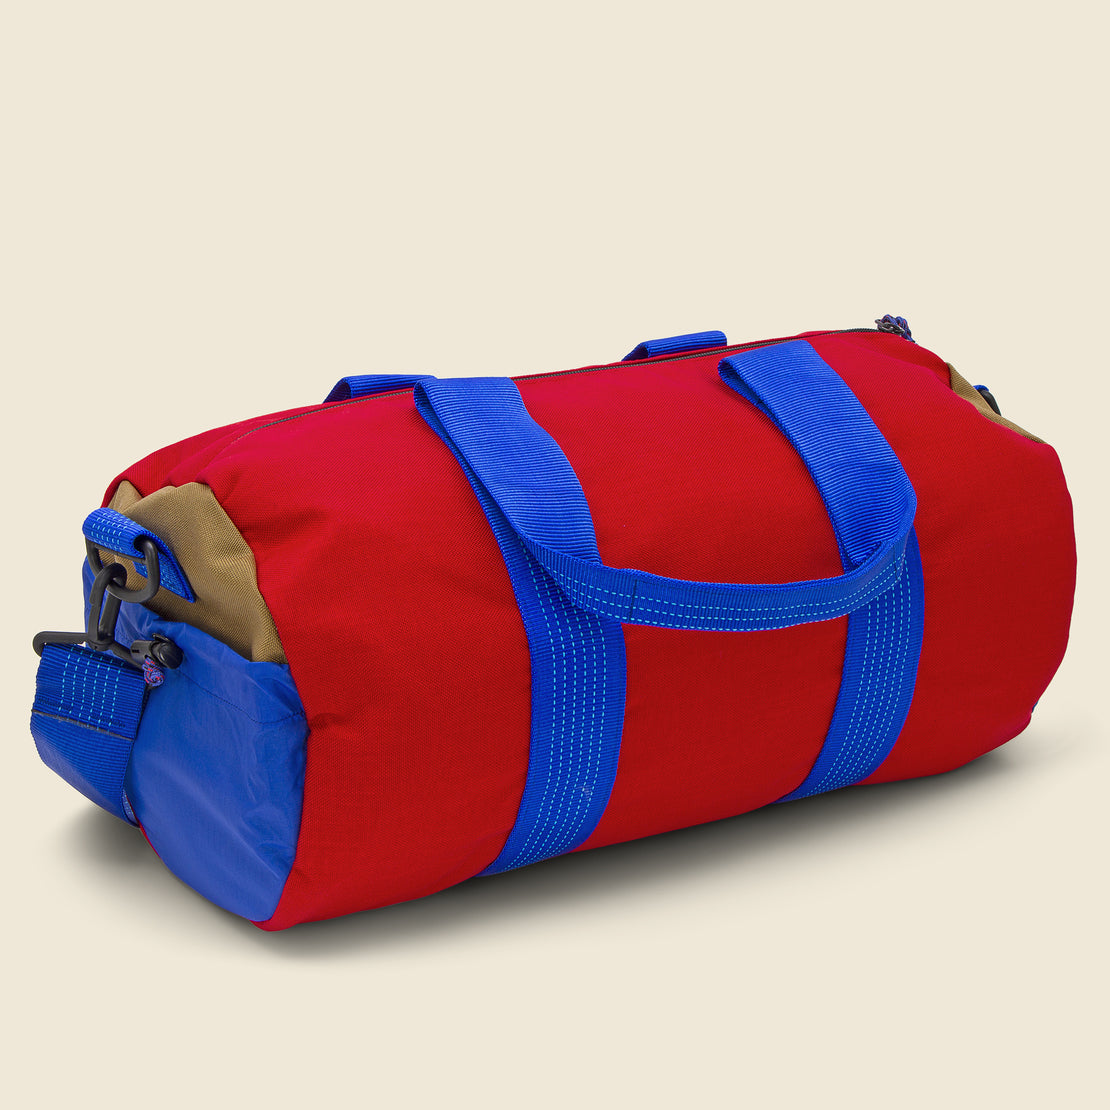 Duffle Bag - Barn Red - Epperson Mountaineering - STAG Provisions - Accessories - Bags / Luggage